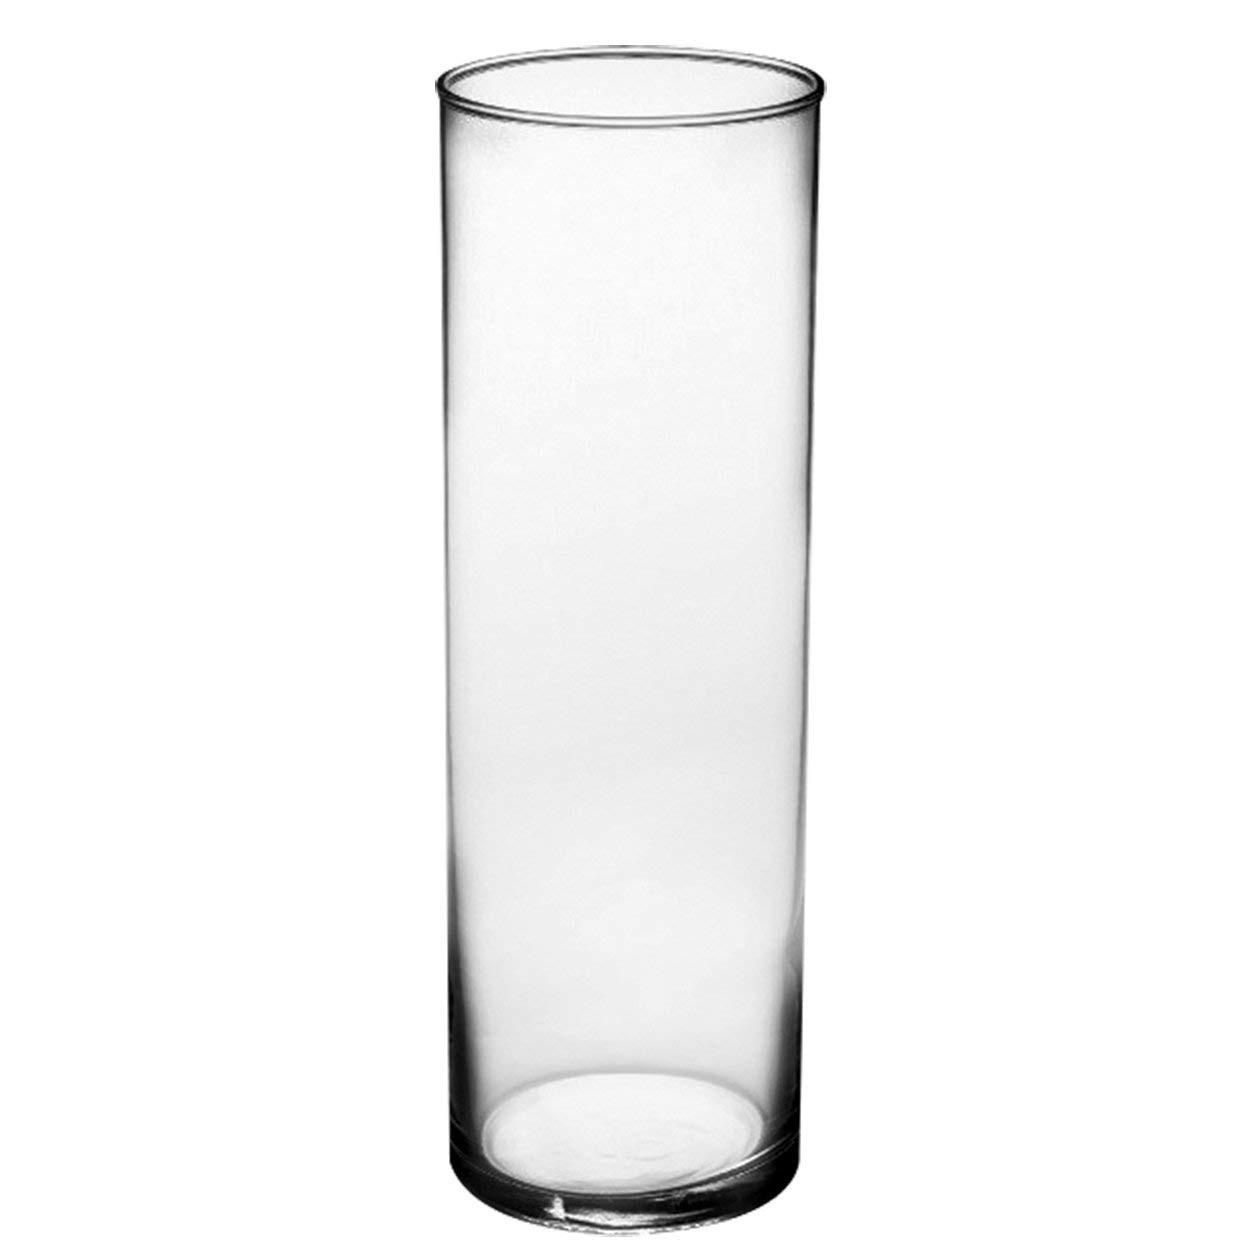 22 Stylish Low Cost Glass Vases 2022 free download low cost glass vases of amazon com syndicate sales 3 1 2 x 10 1 2 cylinder vase clear with amazon com syndicate sales 3 1 2 x 10 1 2 cylinder vase clear planters garden outdoor